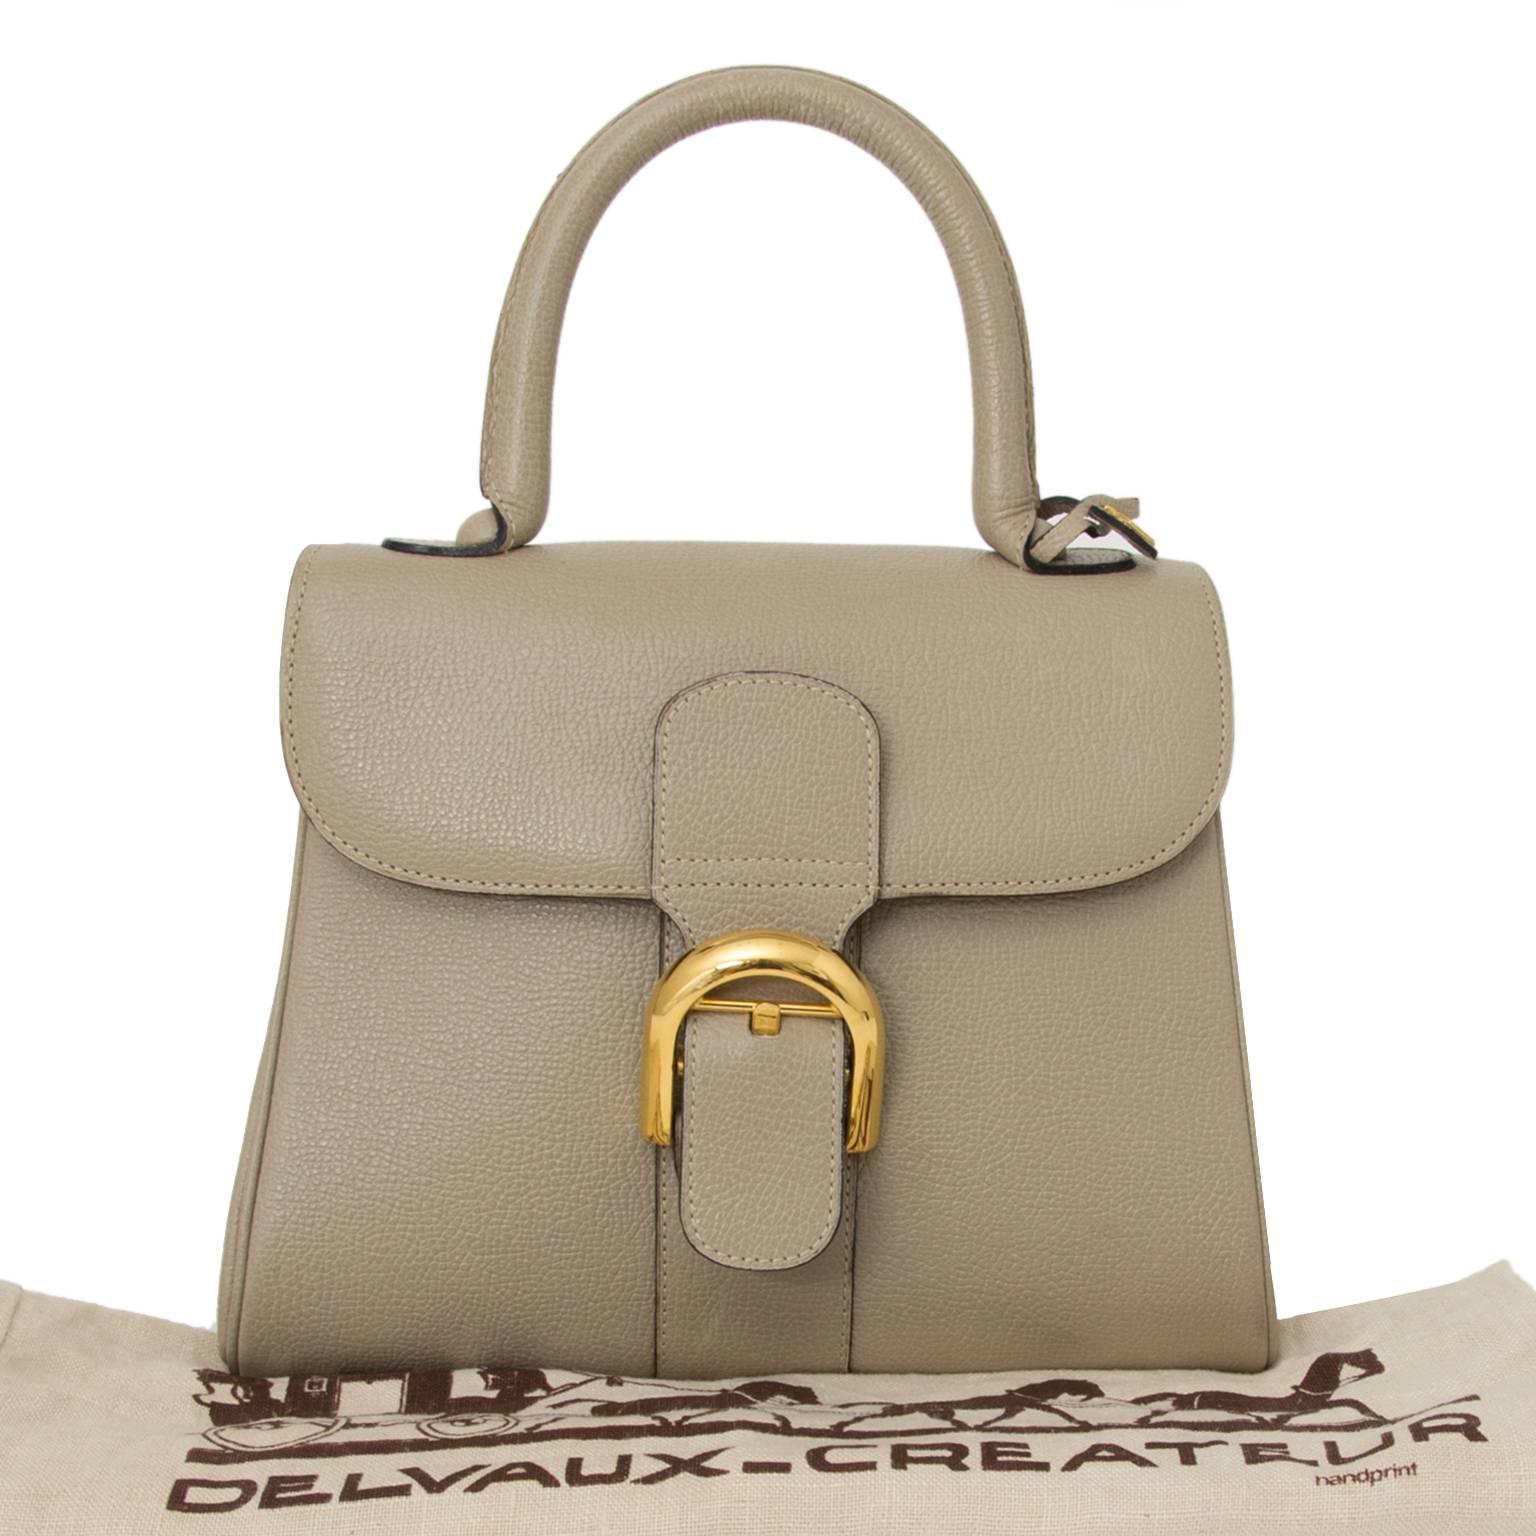 Delvaux brillant PM in a soft and stylish sandy beige. Comes with gold hardware and top handle. There is an iconic D appliqué around the top handle. Four small studs on the bottom will protect this gorgeous bag. The interior features a zipper